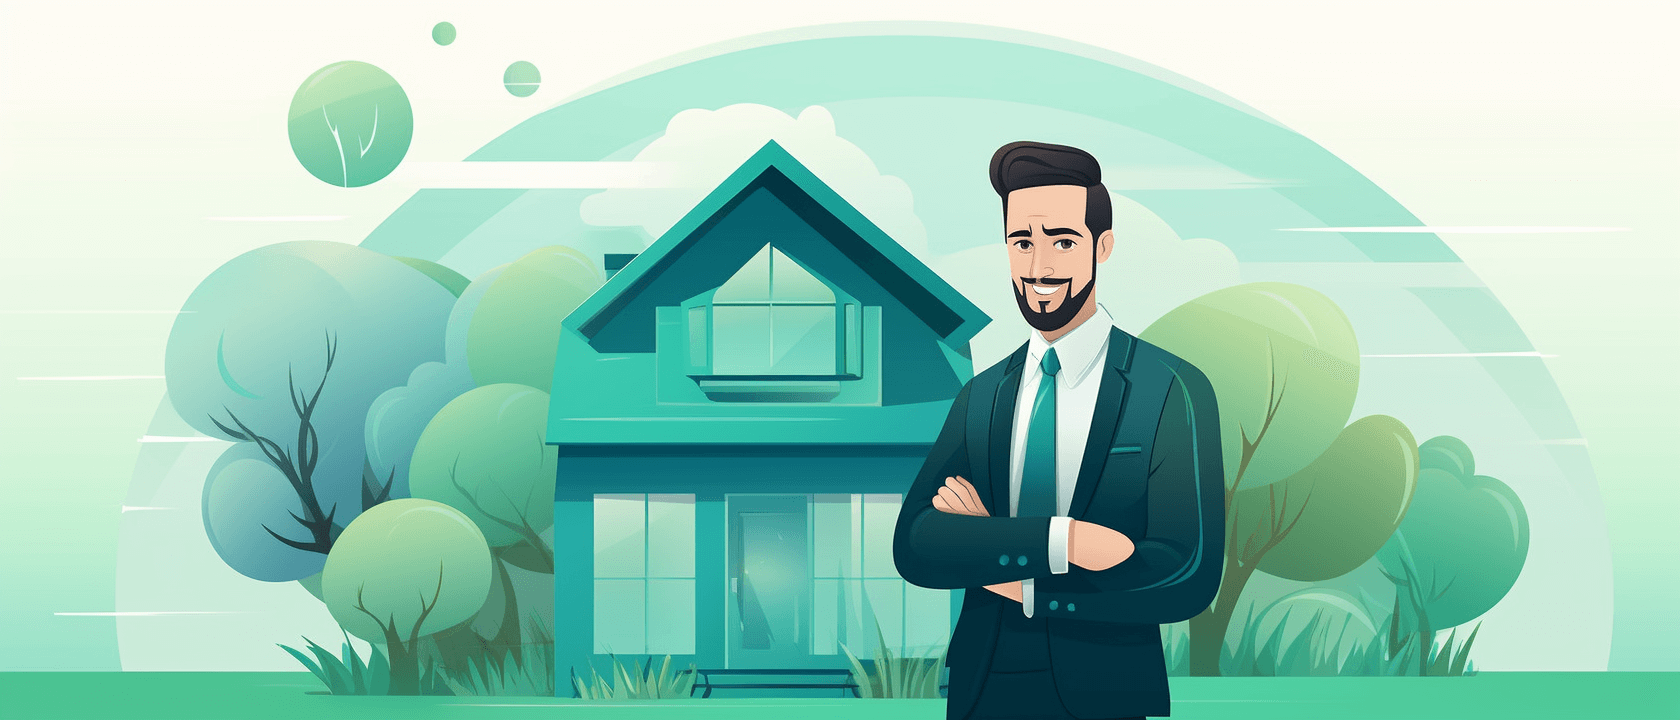 Vector illustration of business person confidently smiling in front of house